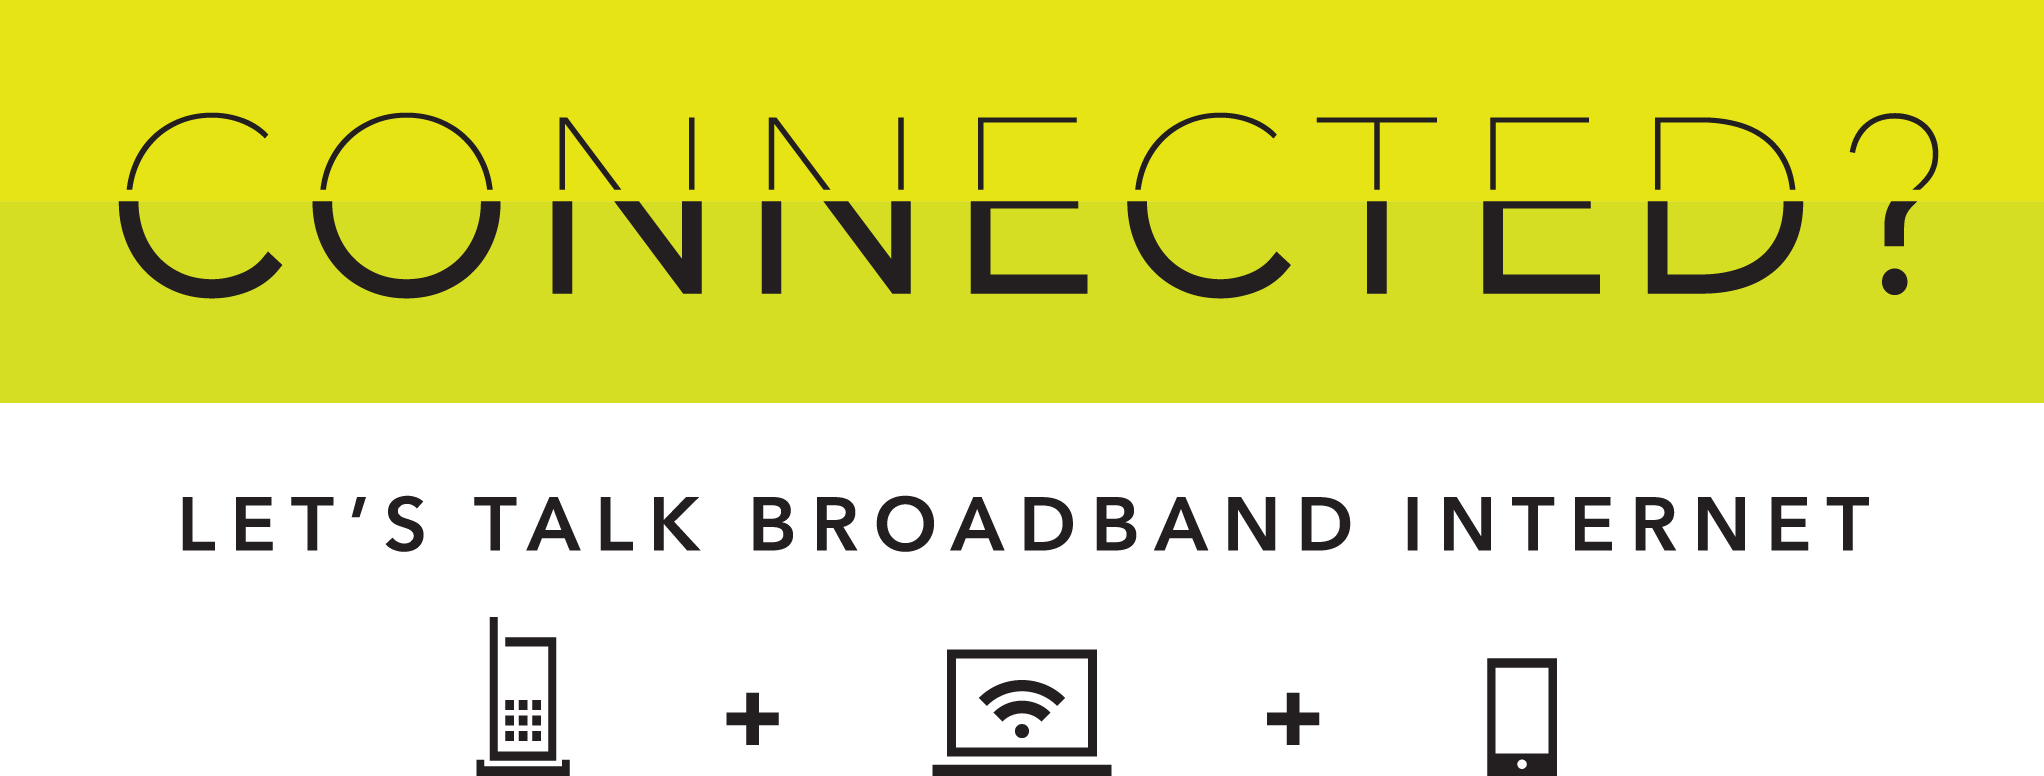 The CRTC wants to talk broadband with Canadians…